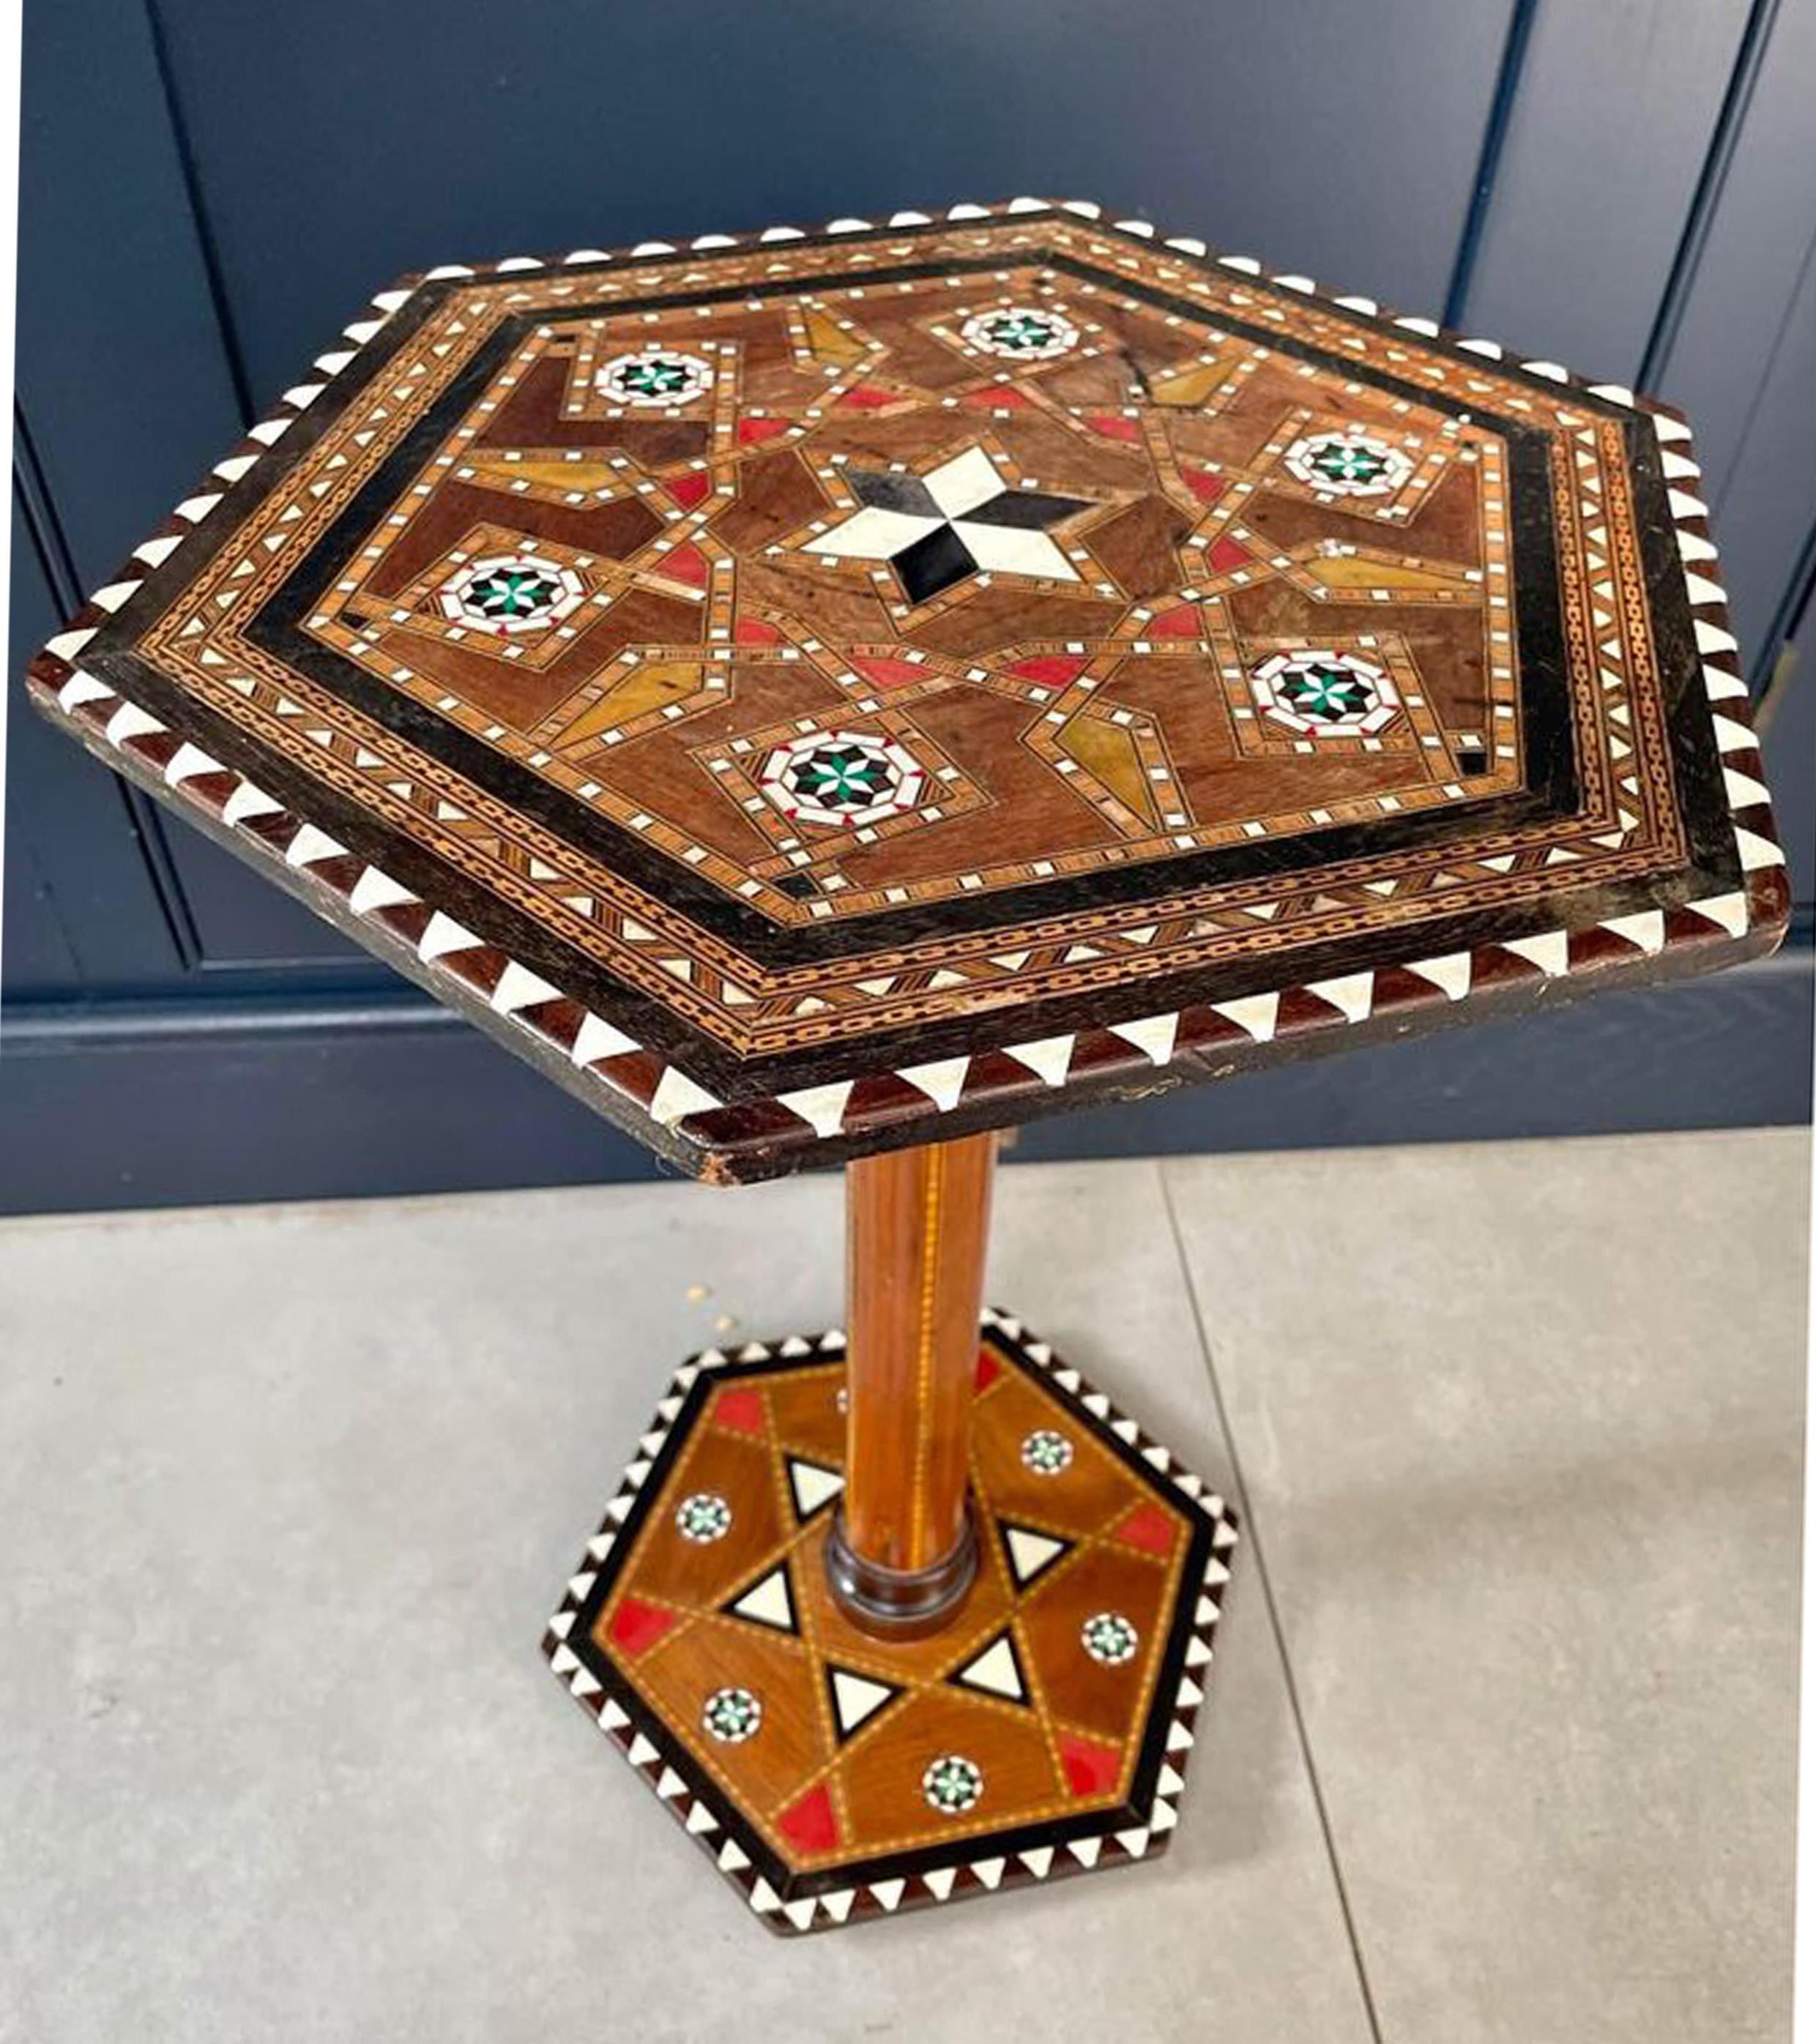 Beautiful 19th Century Design Hexagonal Moorish Fruitwood Tea Table With Parquetry Detailing 

Decorative Throughout With Beautiful Geometric Repeating Parquetry Patterns.

Finished With Ebonised Accents On A Decorative Hexagonal Platform Base. 